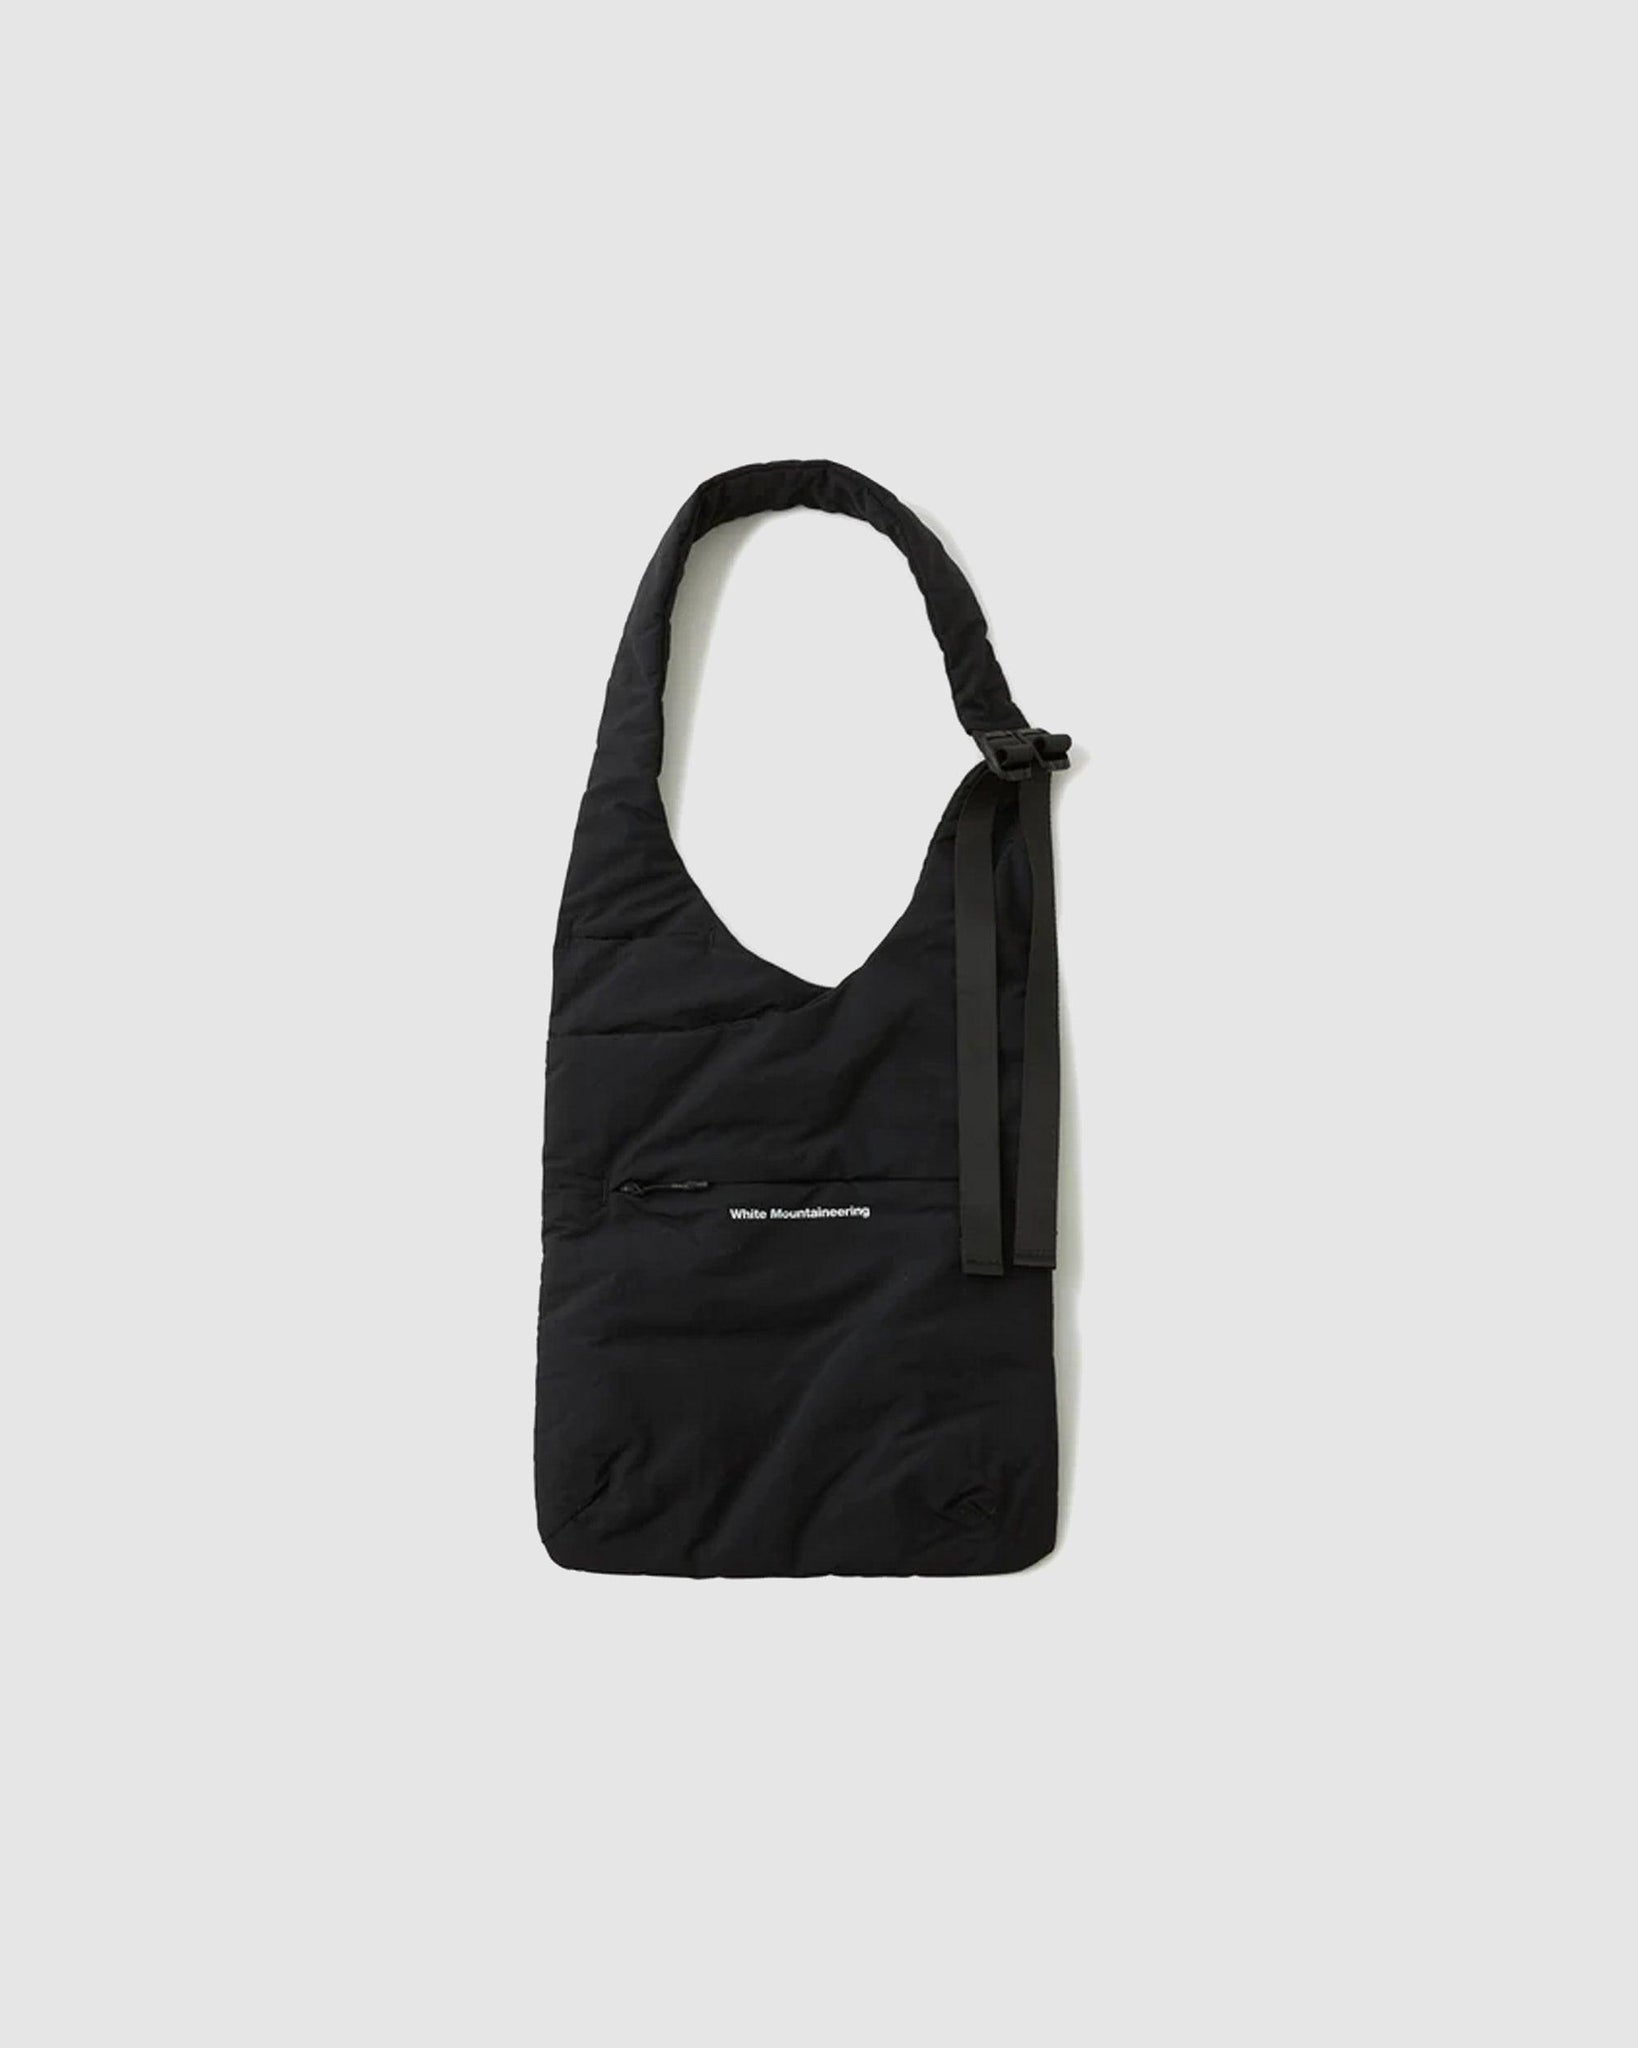 Tussah 2-Way Shoulder Bag Black - {{ collection.title }} - Chinatown Country Club 